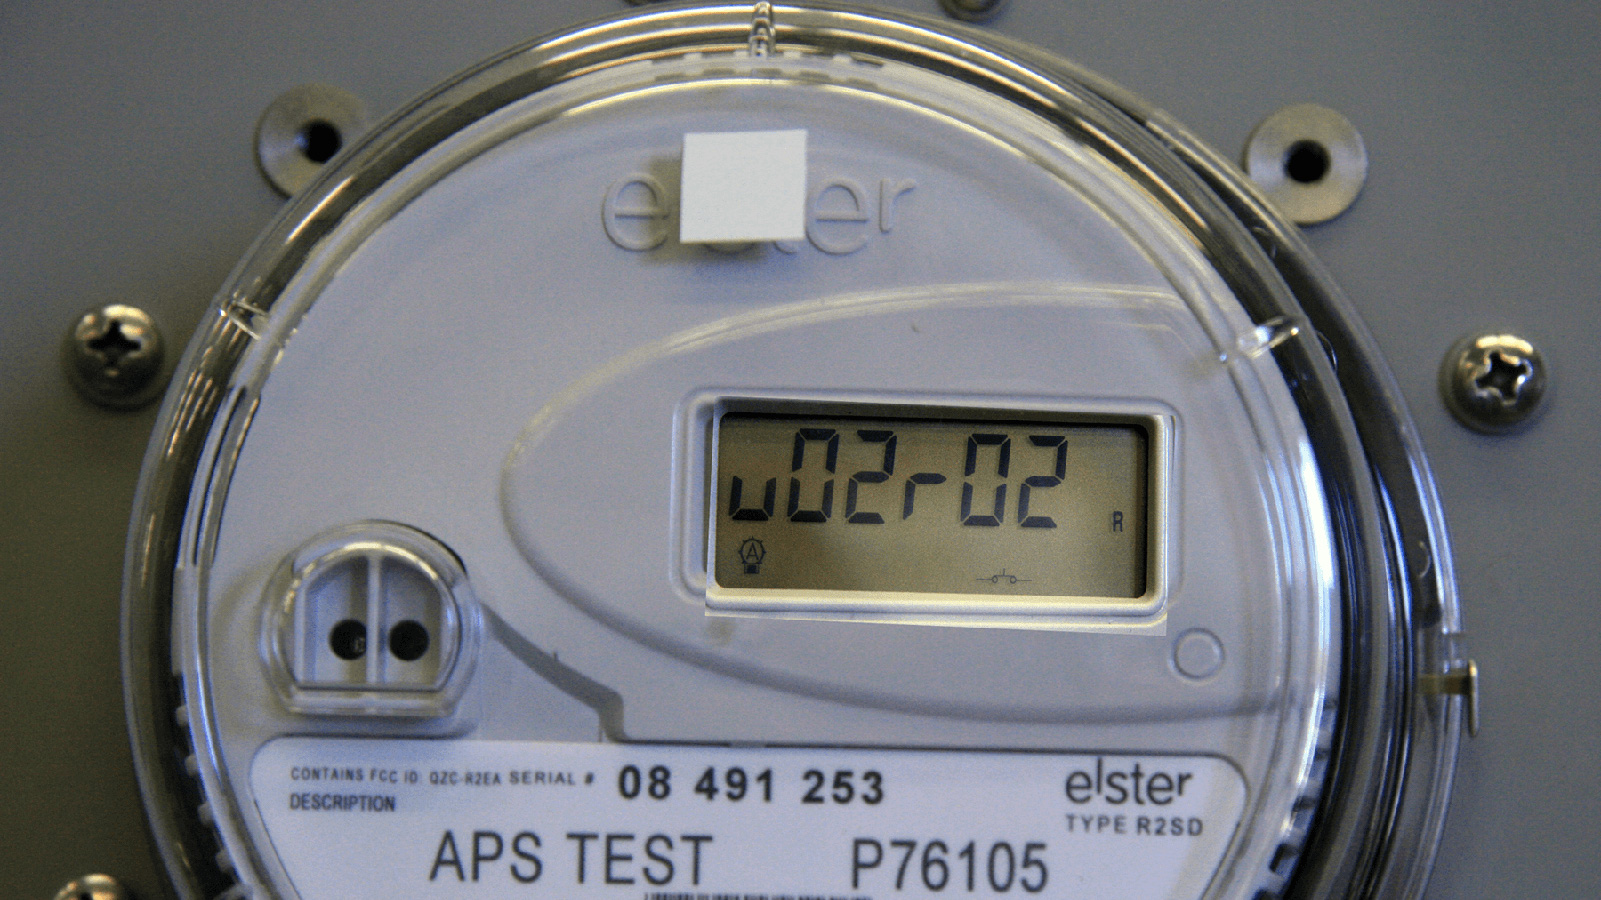 Head-on, detailed image of a smart meter.